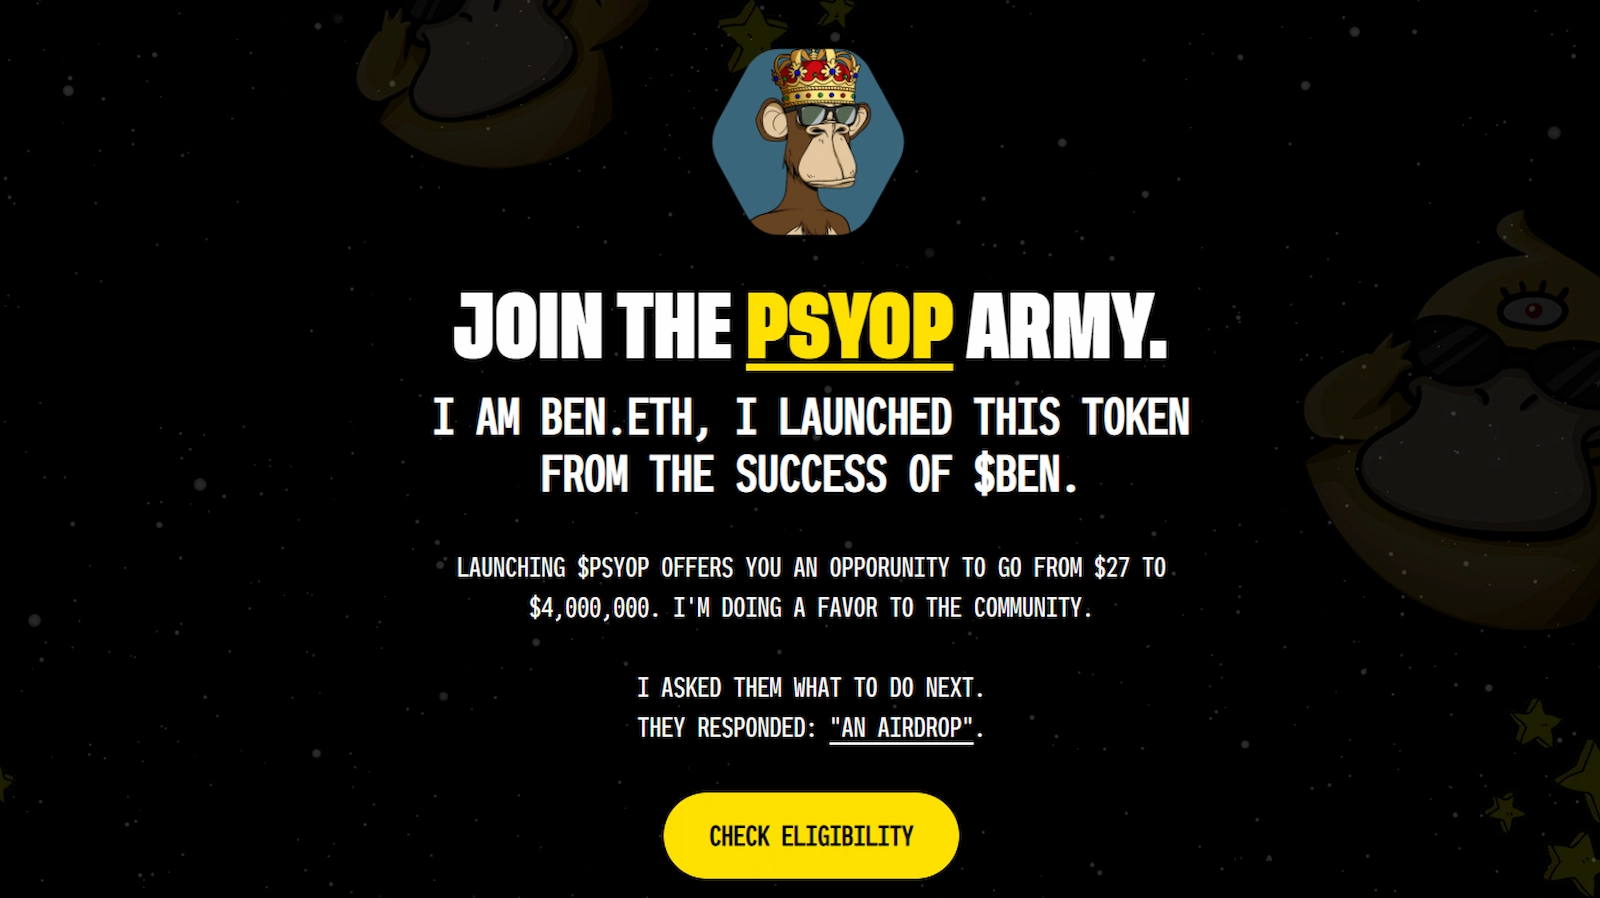 The PSYOP airdrop website has only one page